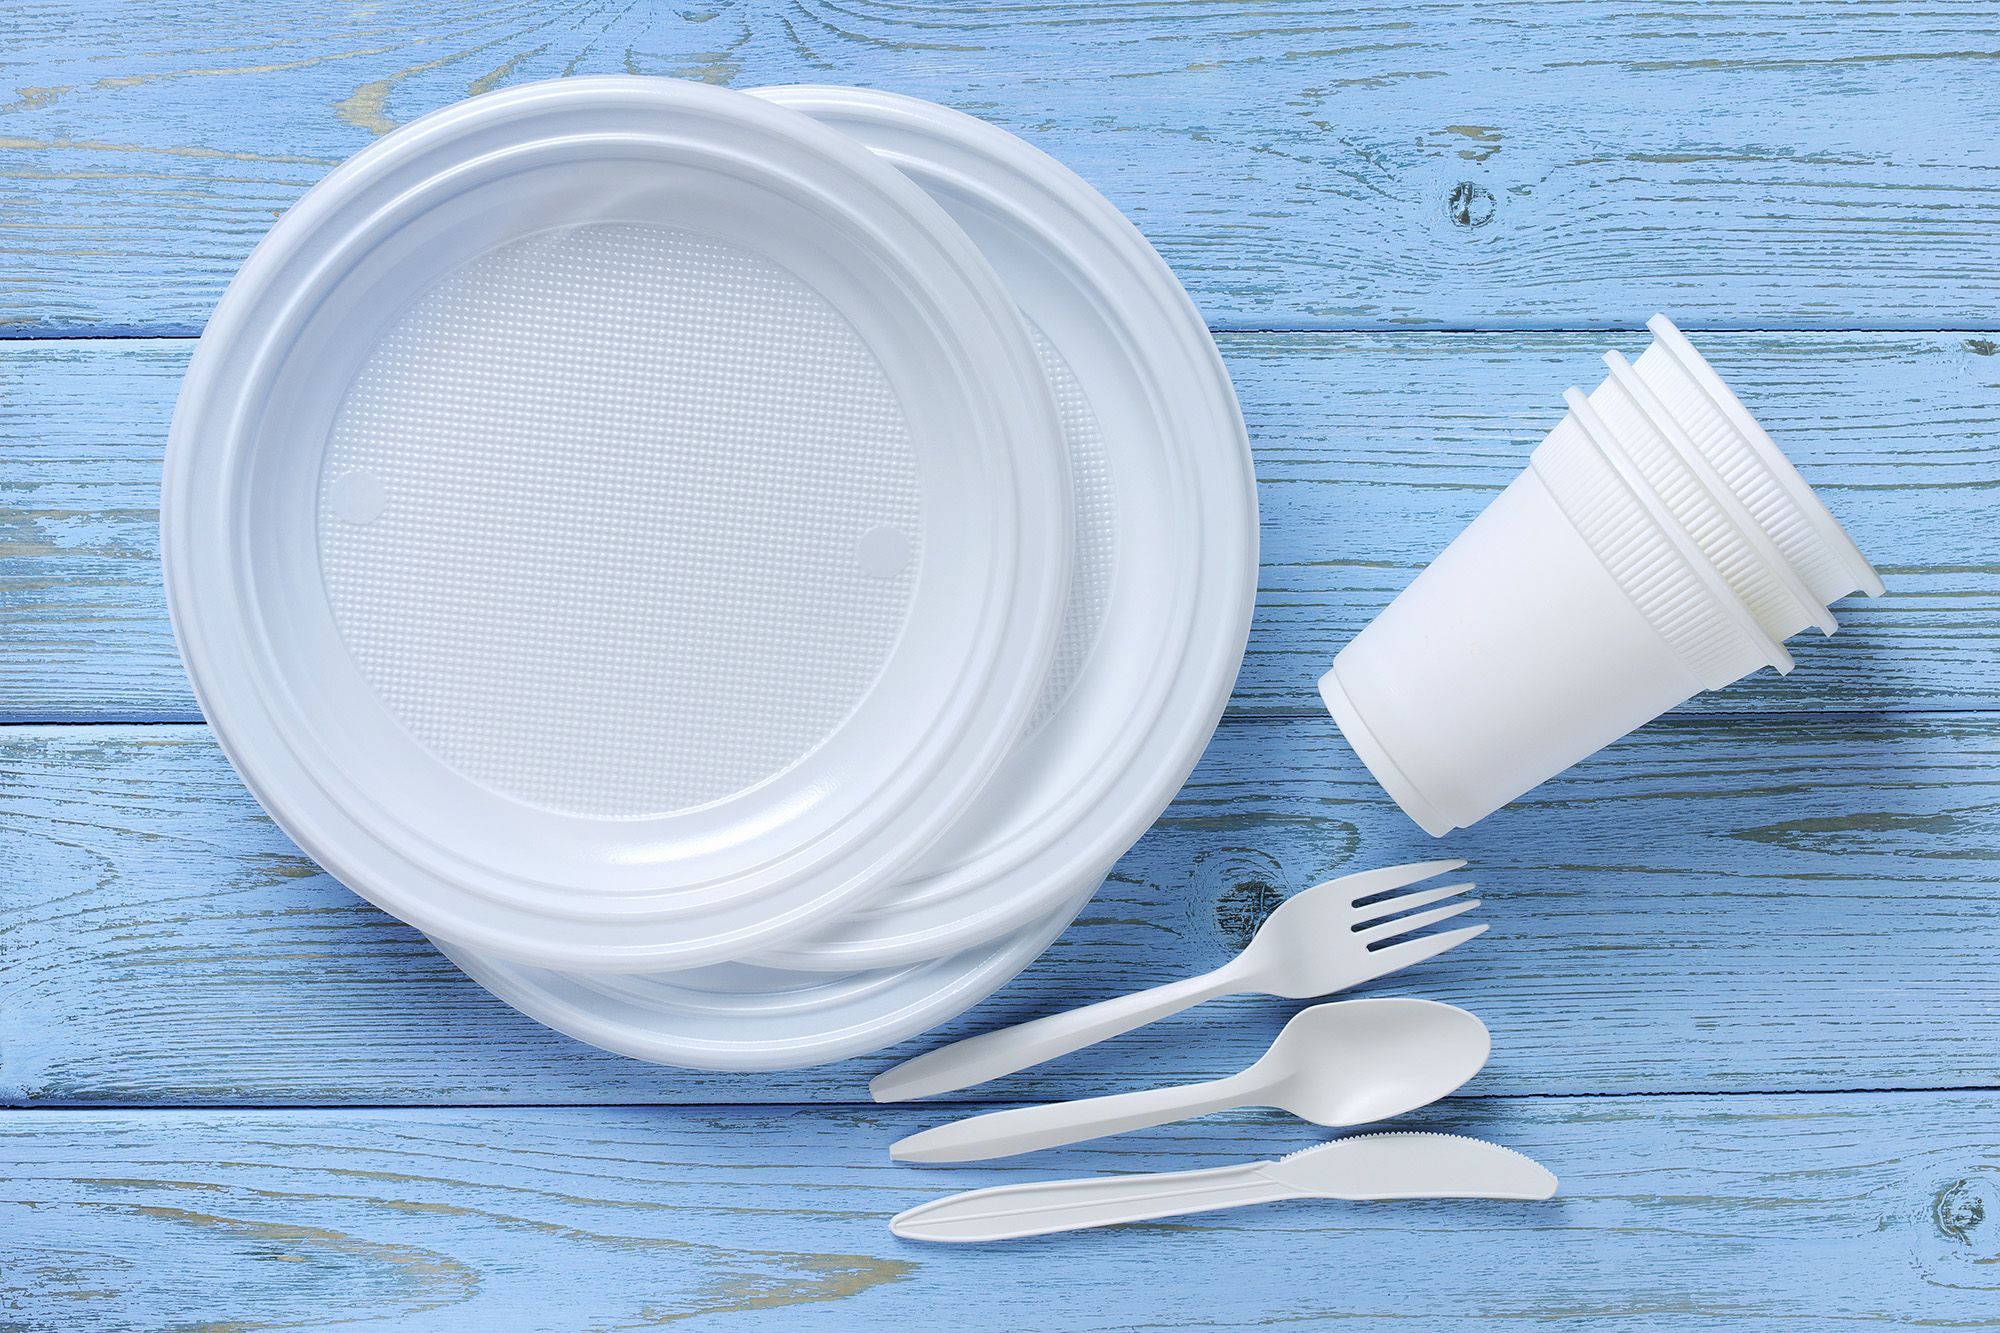 France ban disposable plastic cups and plates